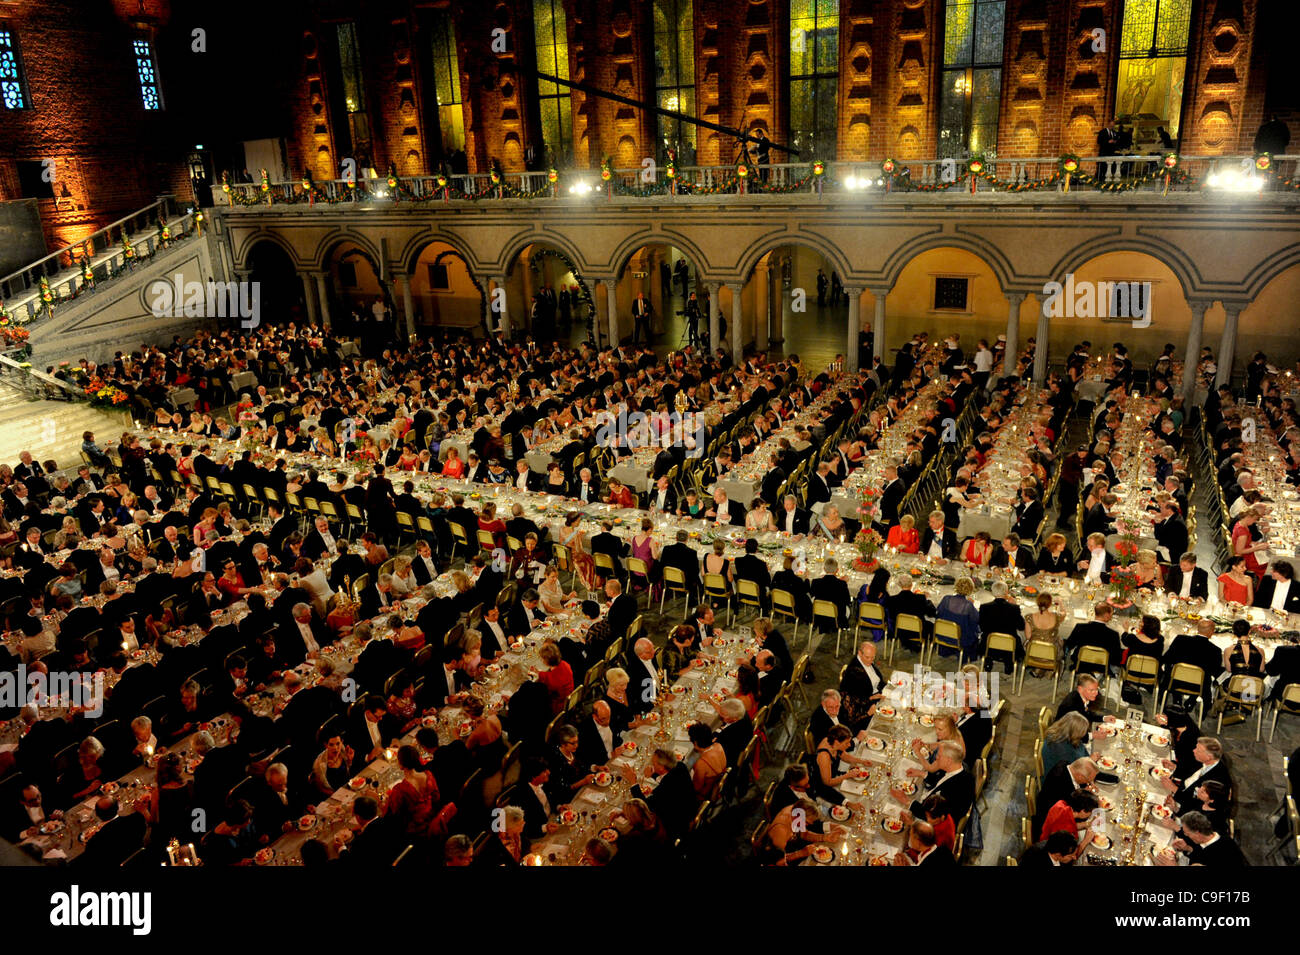 The gala dinner honoring the Nobel Prize Laureates in the Blue Hall in Stockholm City Hall on Saturday December 10th 2011 Stock Photo